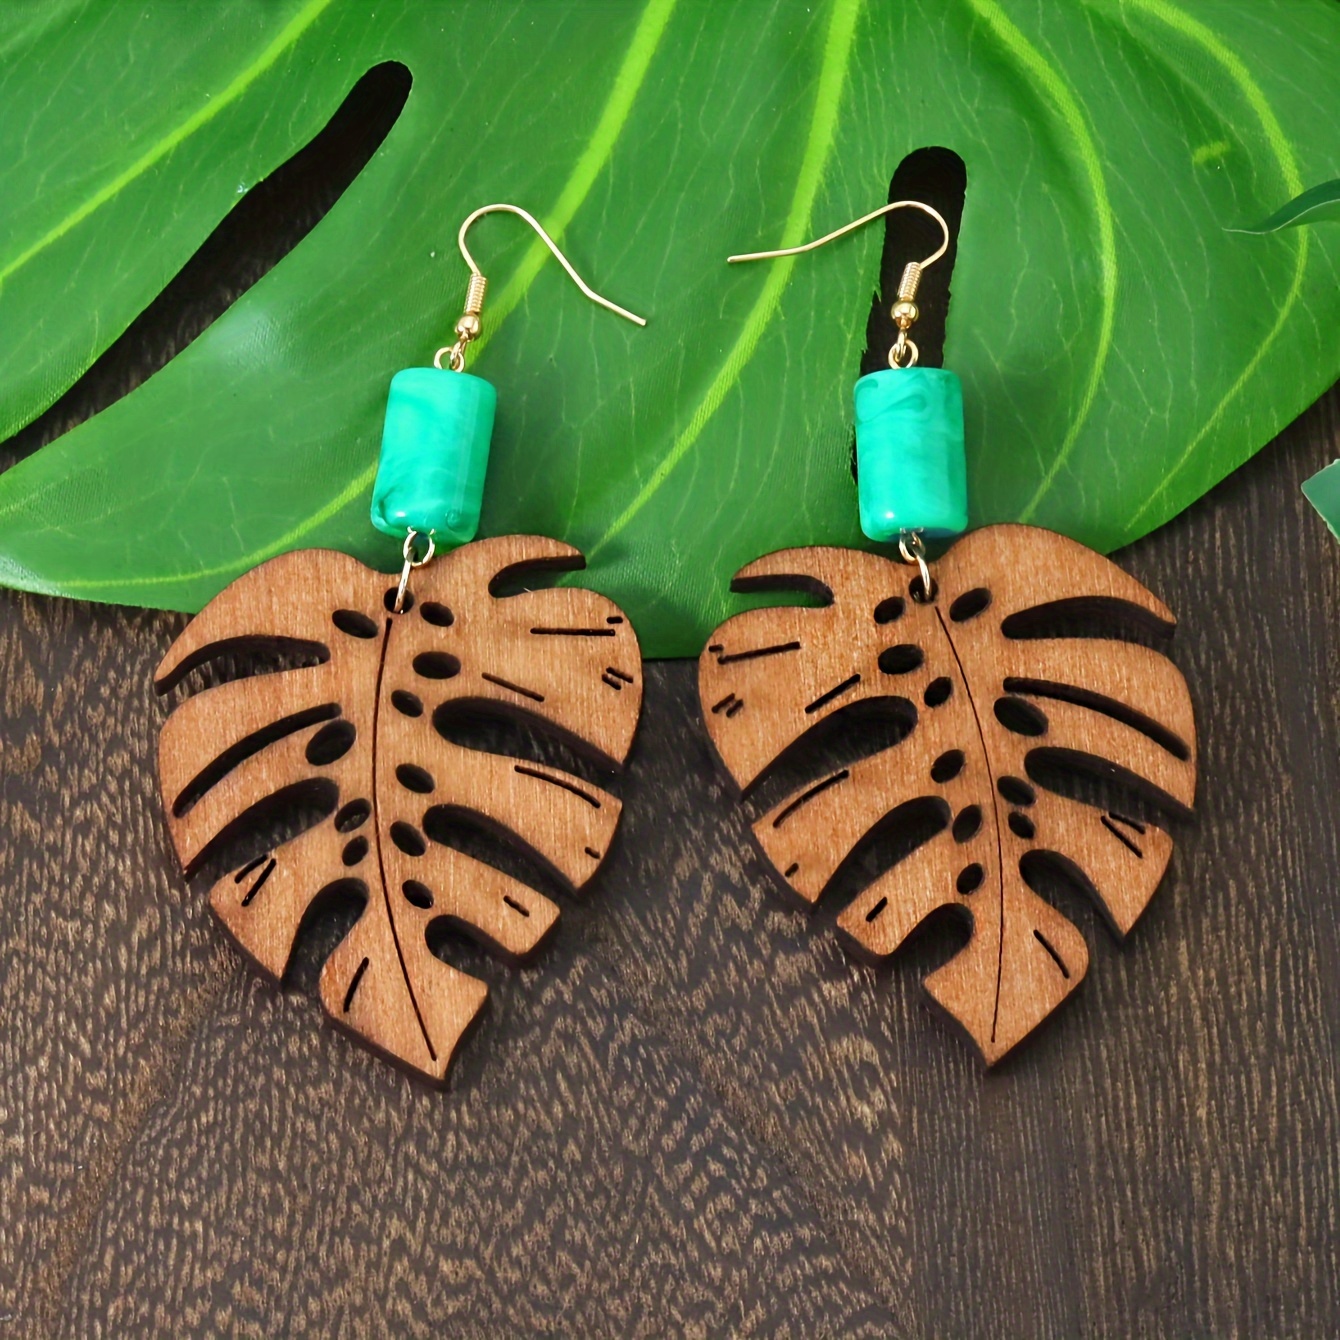 

1 Pair Of Boho Style Drop Earrings Wooden Pendant Retro Tropical Leaf Design Match Daily Outfits Party Accessories Summer Vacation Decor